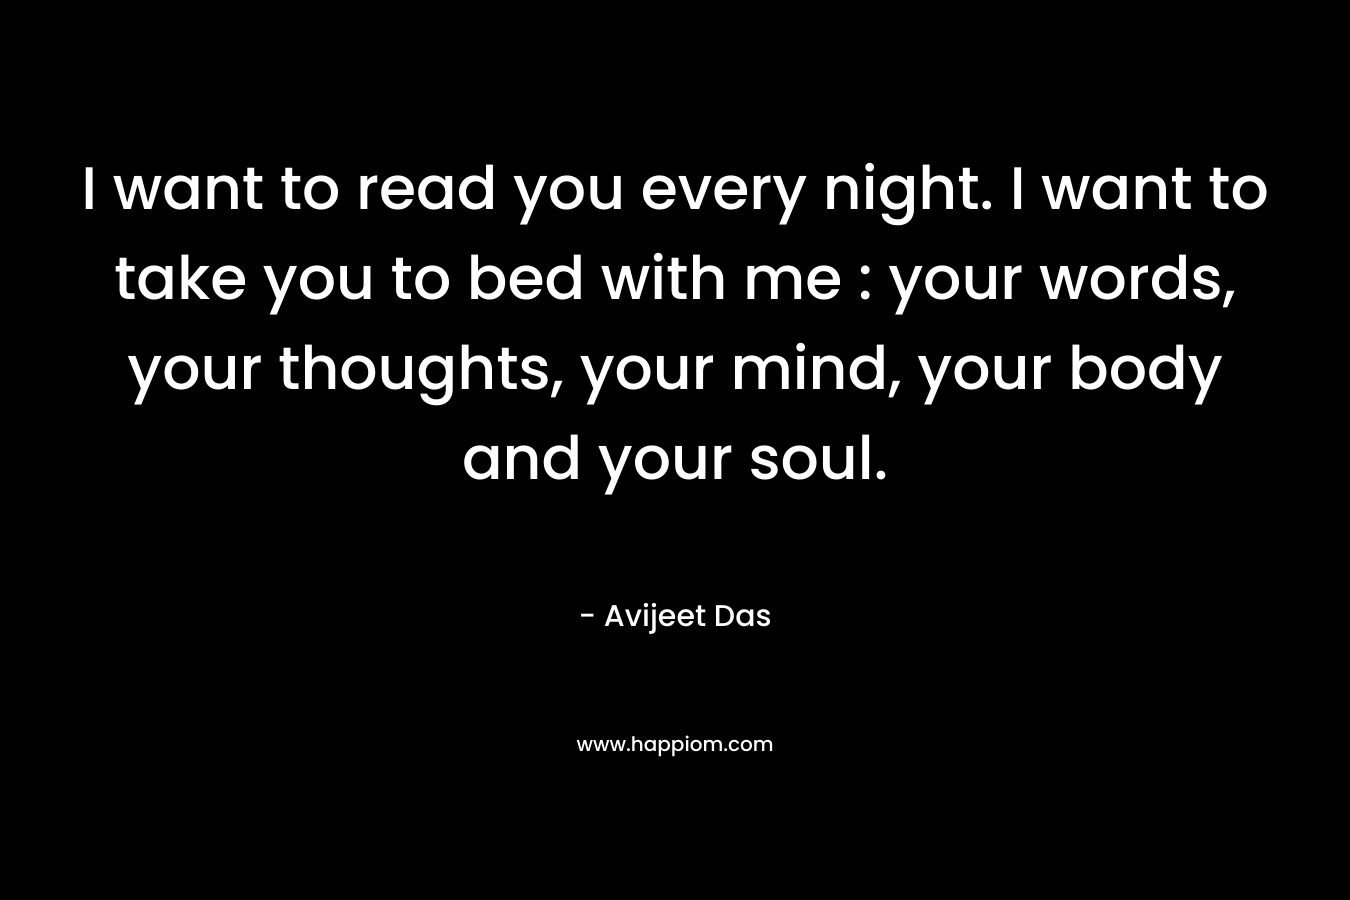 I want to read you every night. I want to take you to bed with me : your words, your thoughts, your mind, your body and your soul.